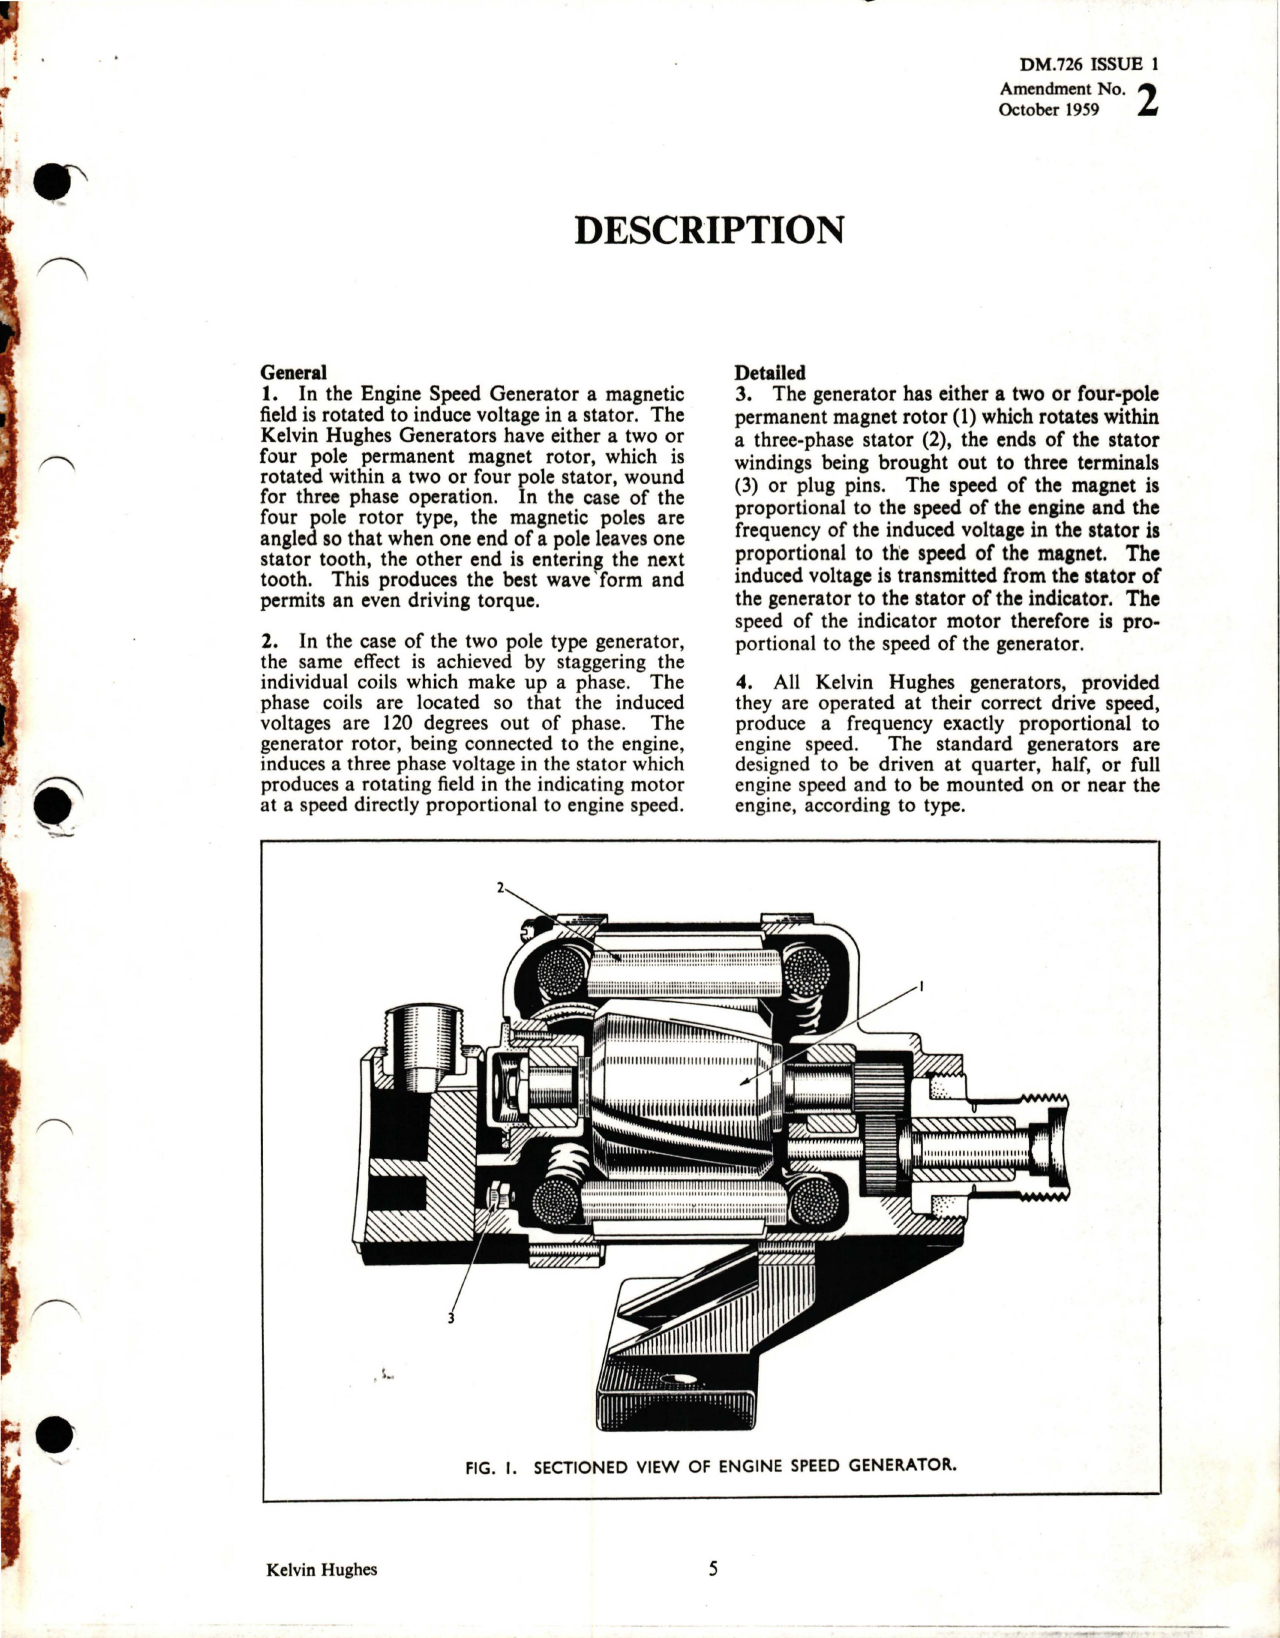 Sample page 5 from AirCorps Library document: Maintenance Instructions for Electrical Engine Speed Generators - Issue No.1